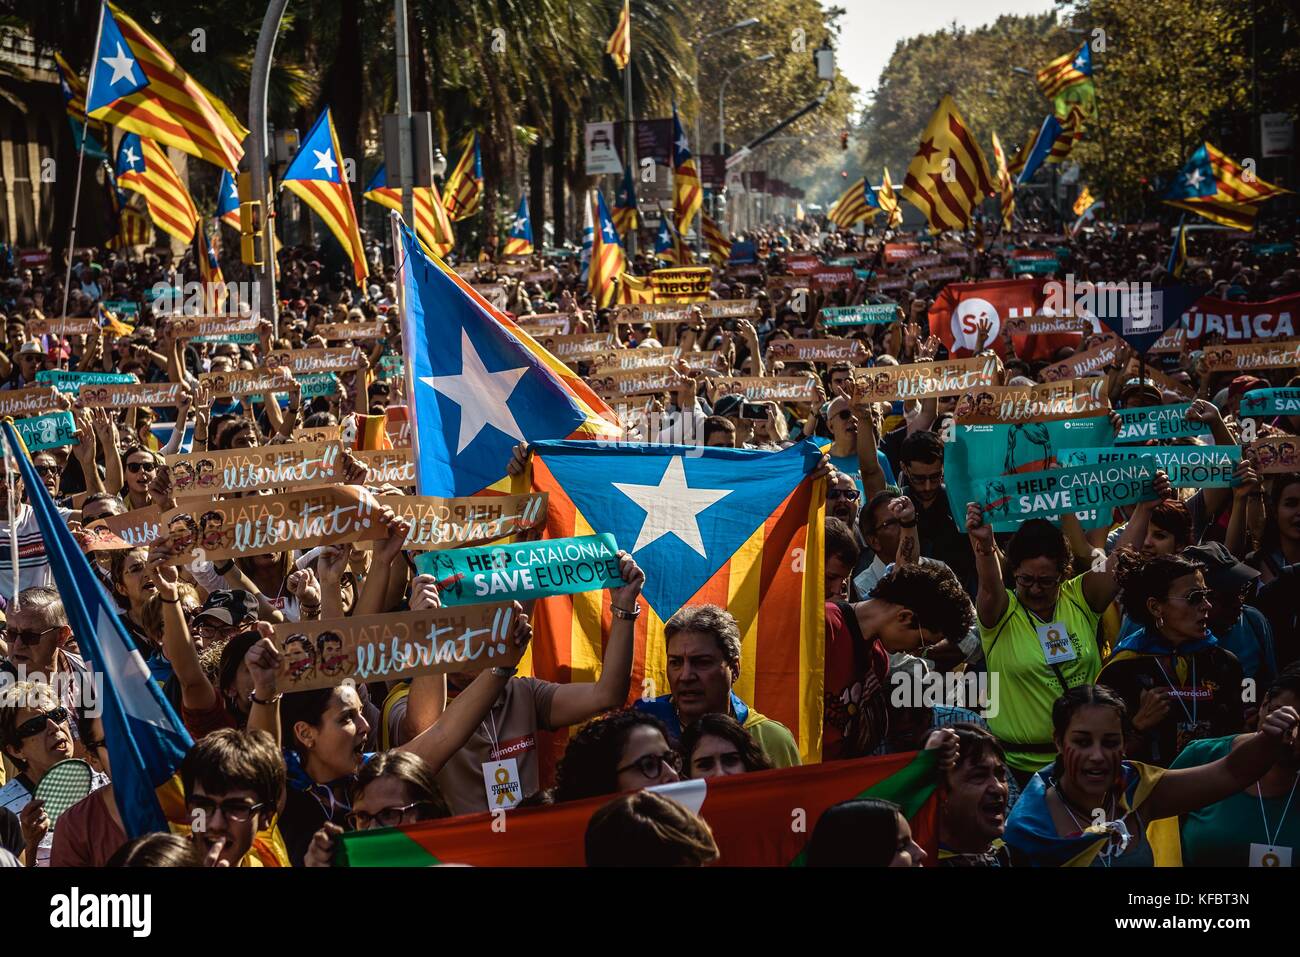 Barcelona, Spain. 27th Oct, 2017. Catalan separatists shout slogans as they protest outside the Catalan Parliament awaiting a plenary session to valorate the application of Article 155 of the Spanish constitution by Spain's Central Government with the goal to return to 'legality and institutional normalcy' in Catalonia Credit: Matthias Oesterle/Alamy Live News Stock Photo